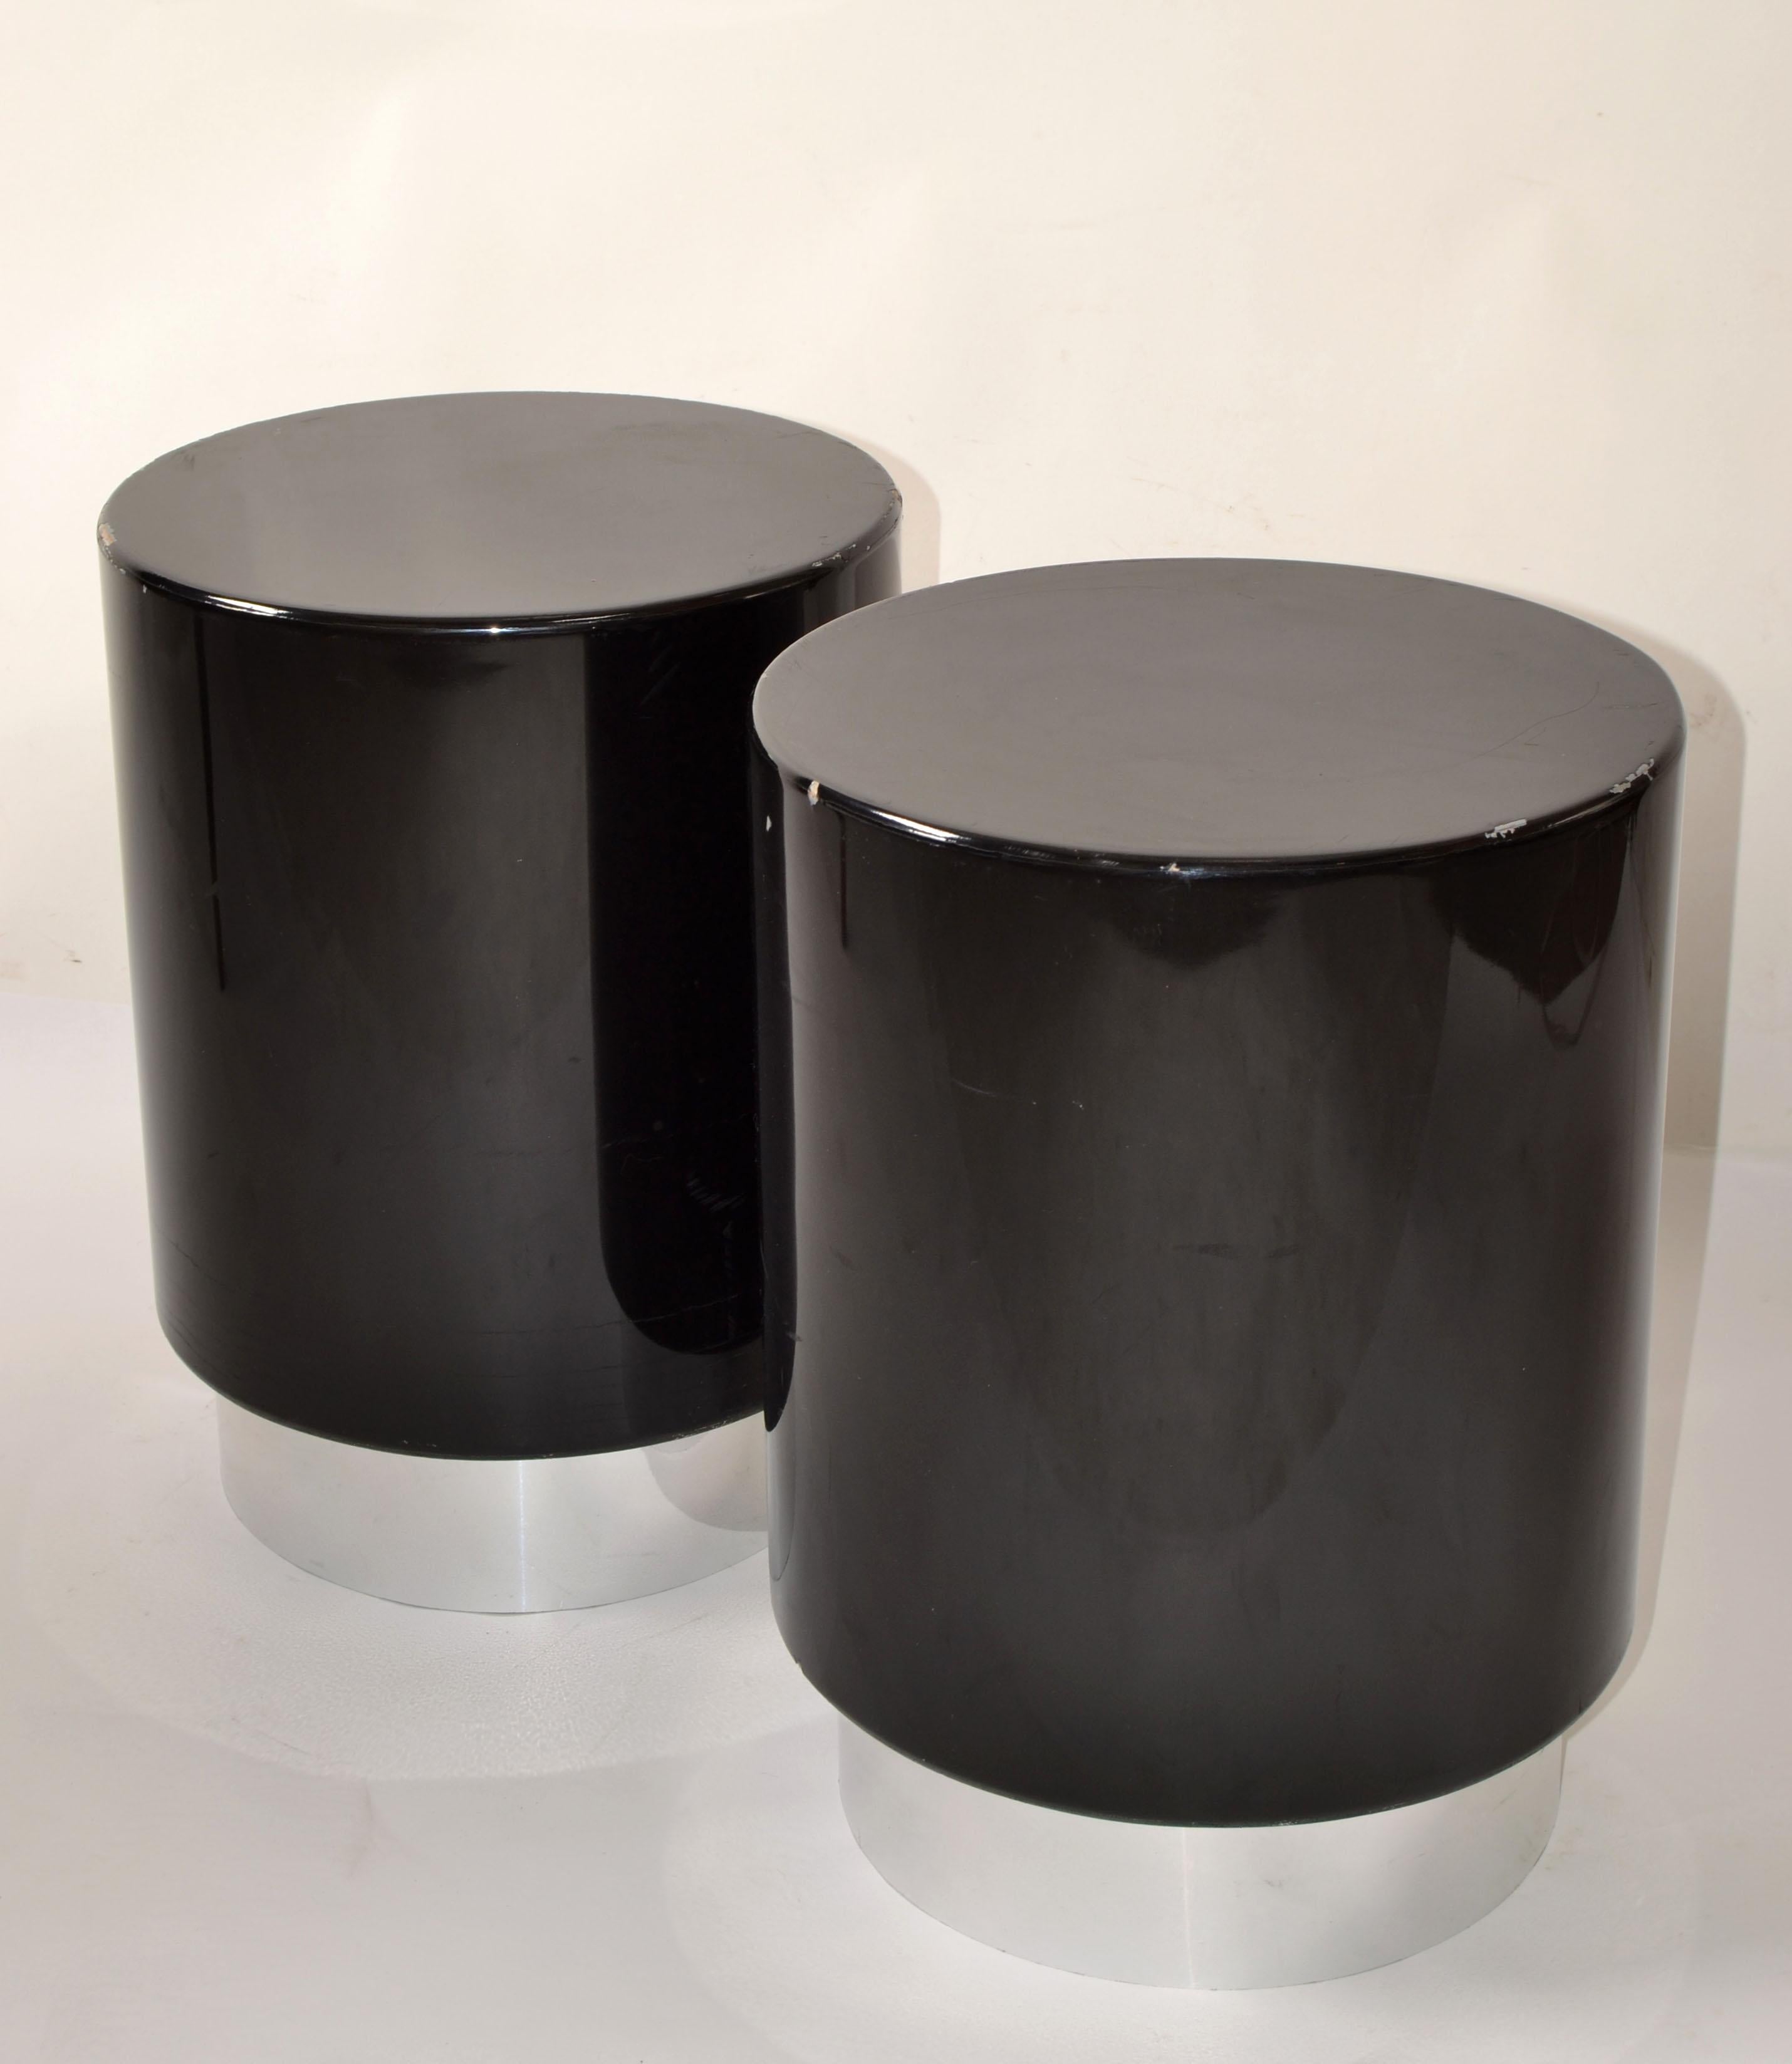 Late 20th Century Set of 2 Drum Drink Tables Black Gloss Lacquer & Chrome Base Mid-Century Modern For Sale